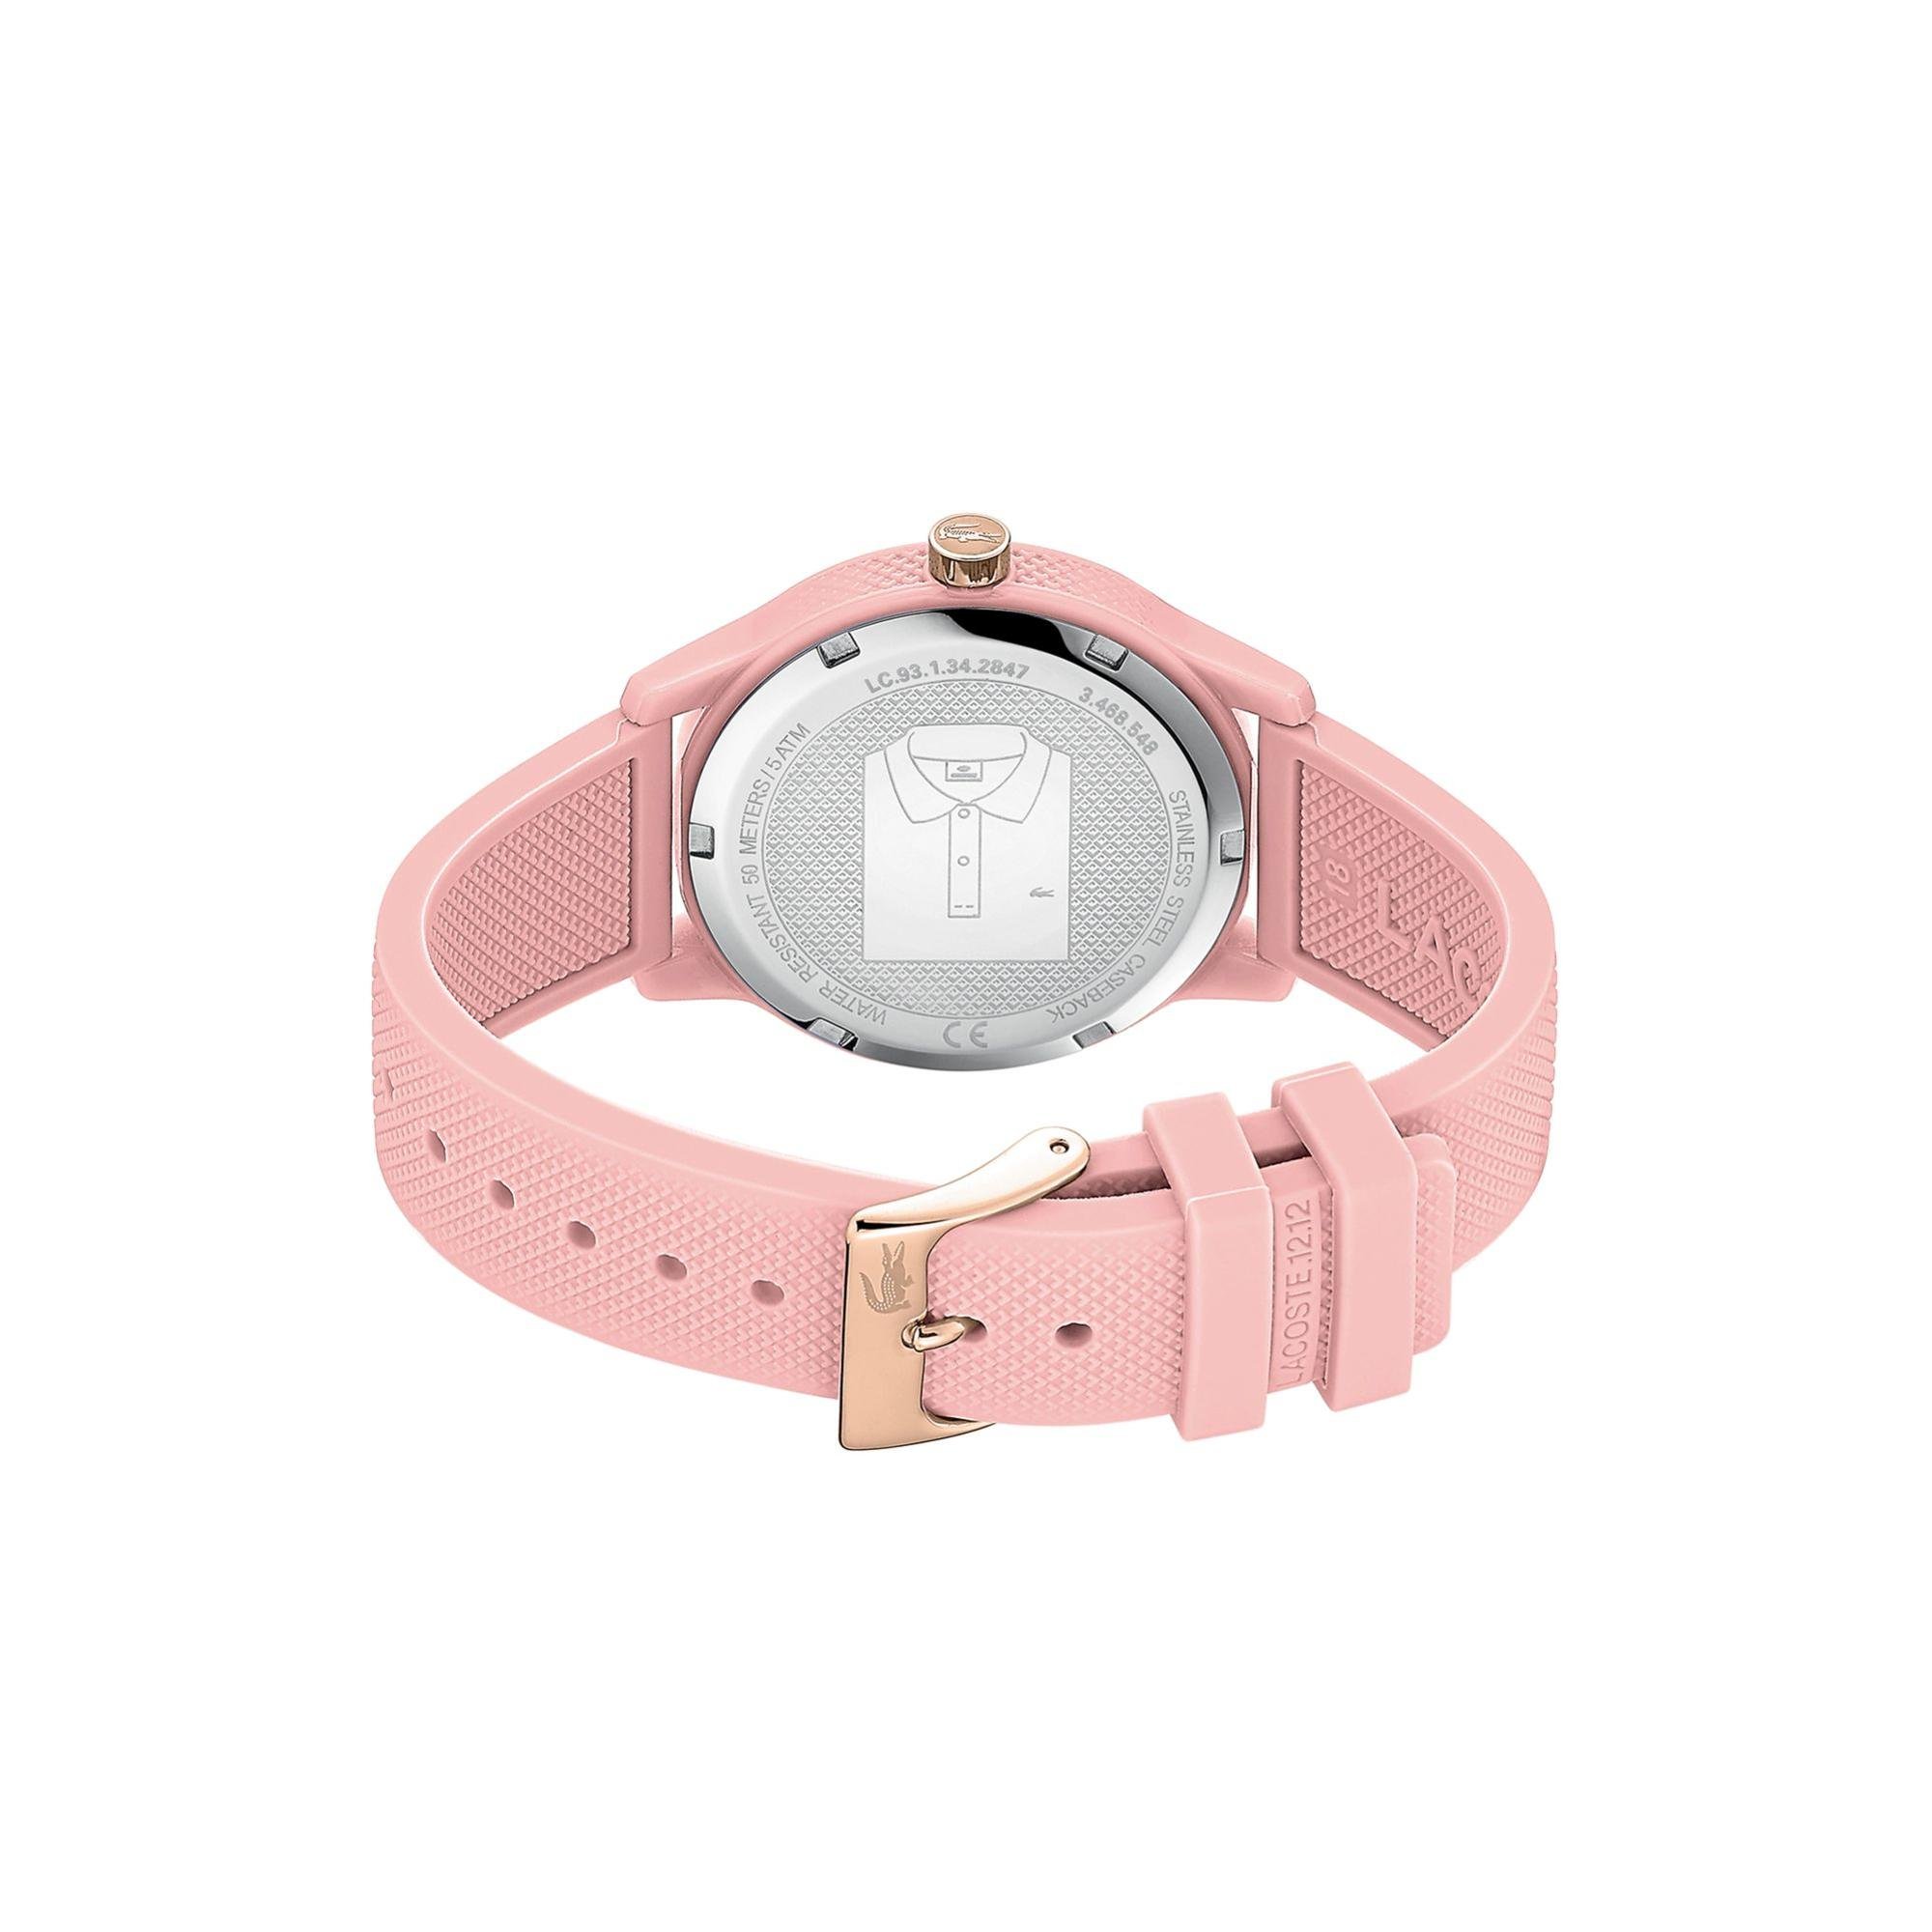 Lacoste.12.12 Ladies Watch with Pink Silicone Petit Piqué Pattern Strap